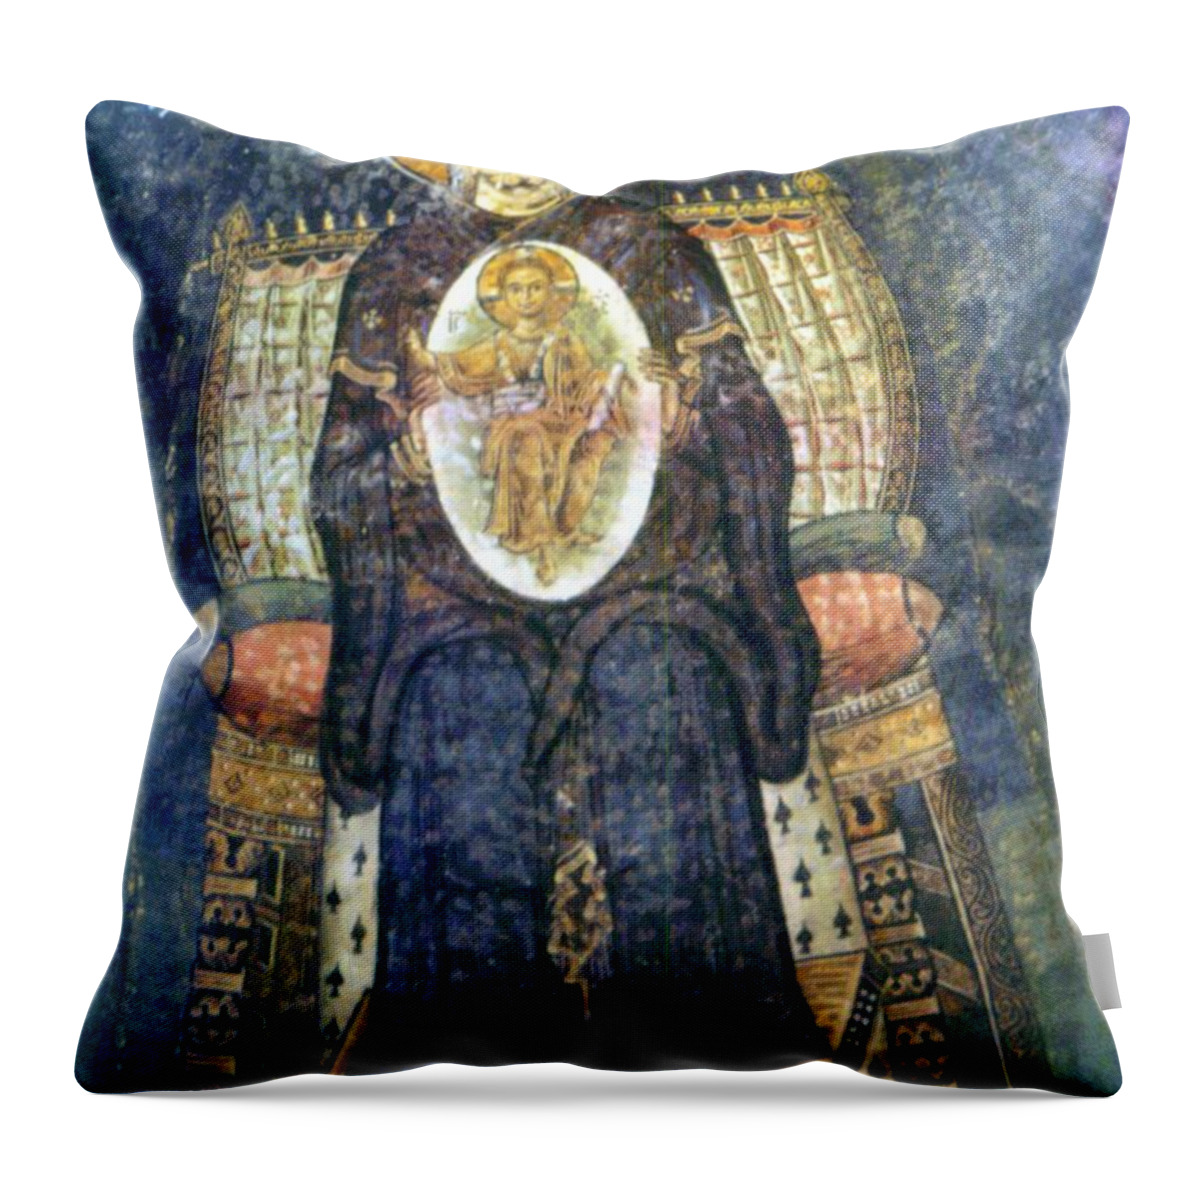 Interior Throw Pillow featuring the painting Madonna And Child by Macedonian School